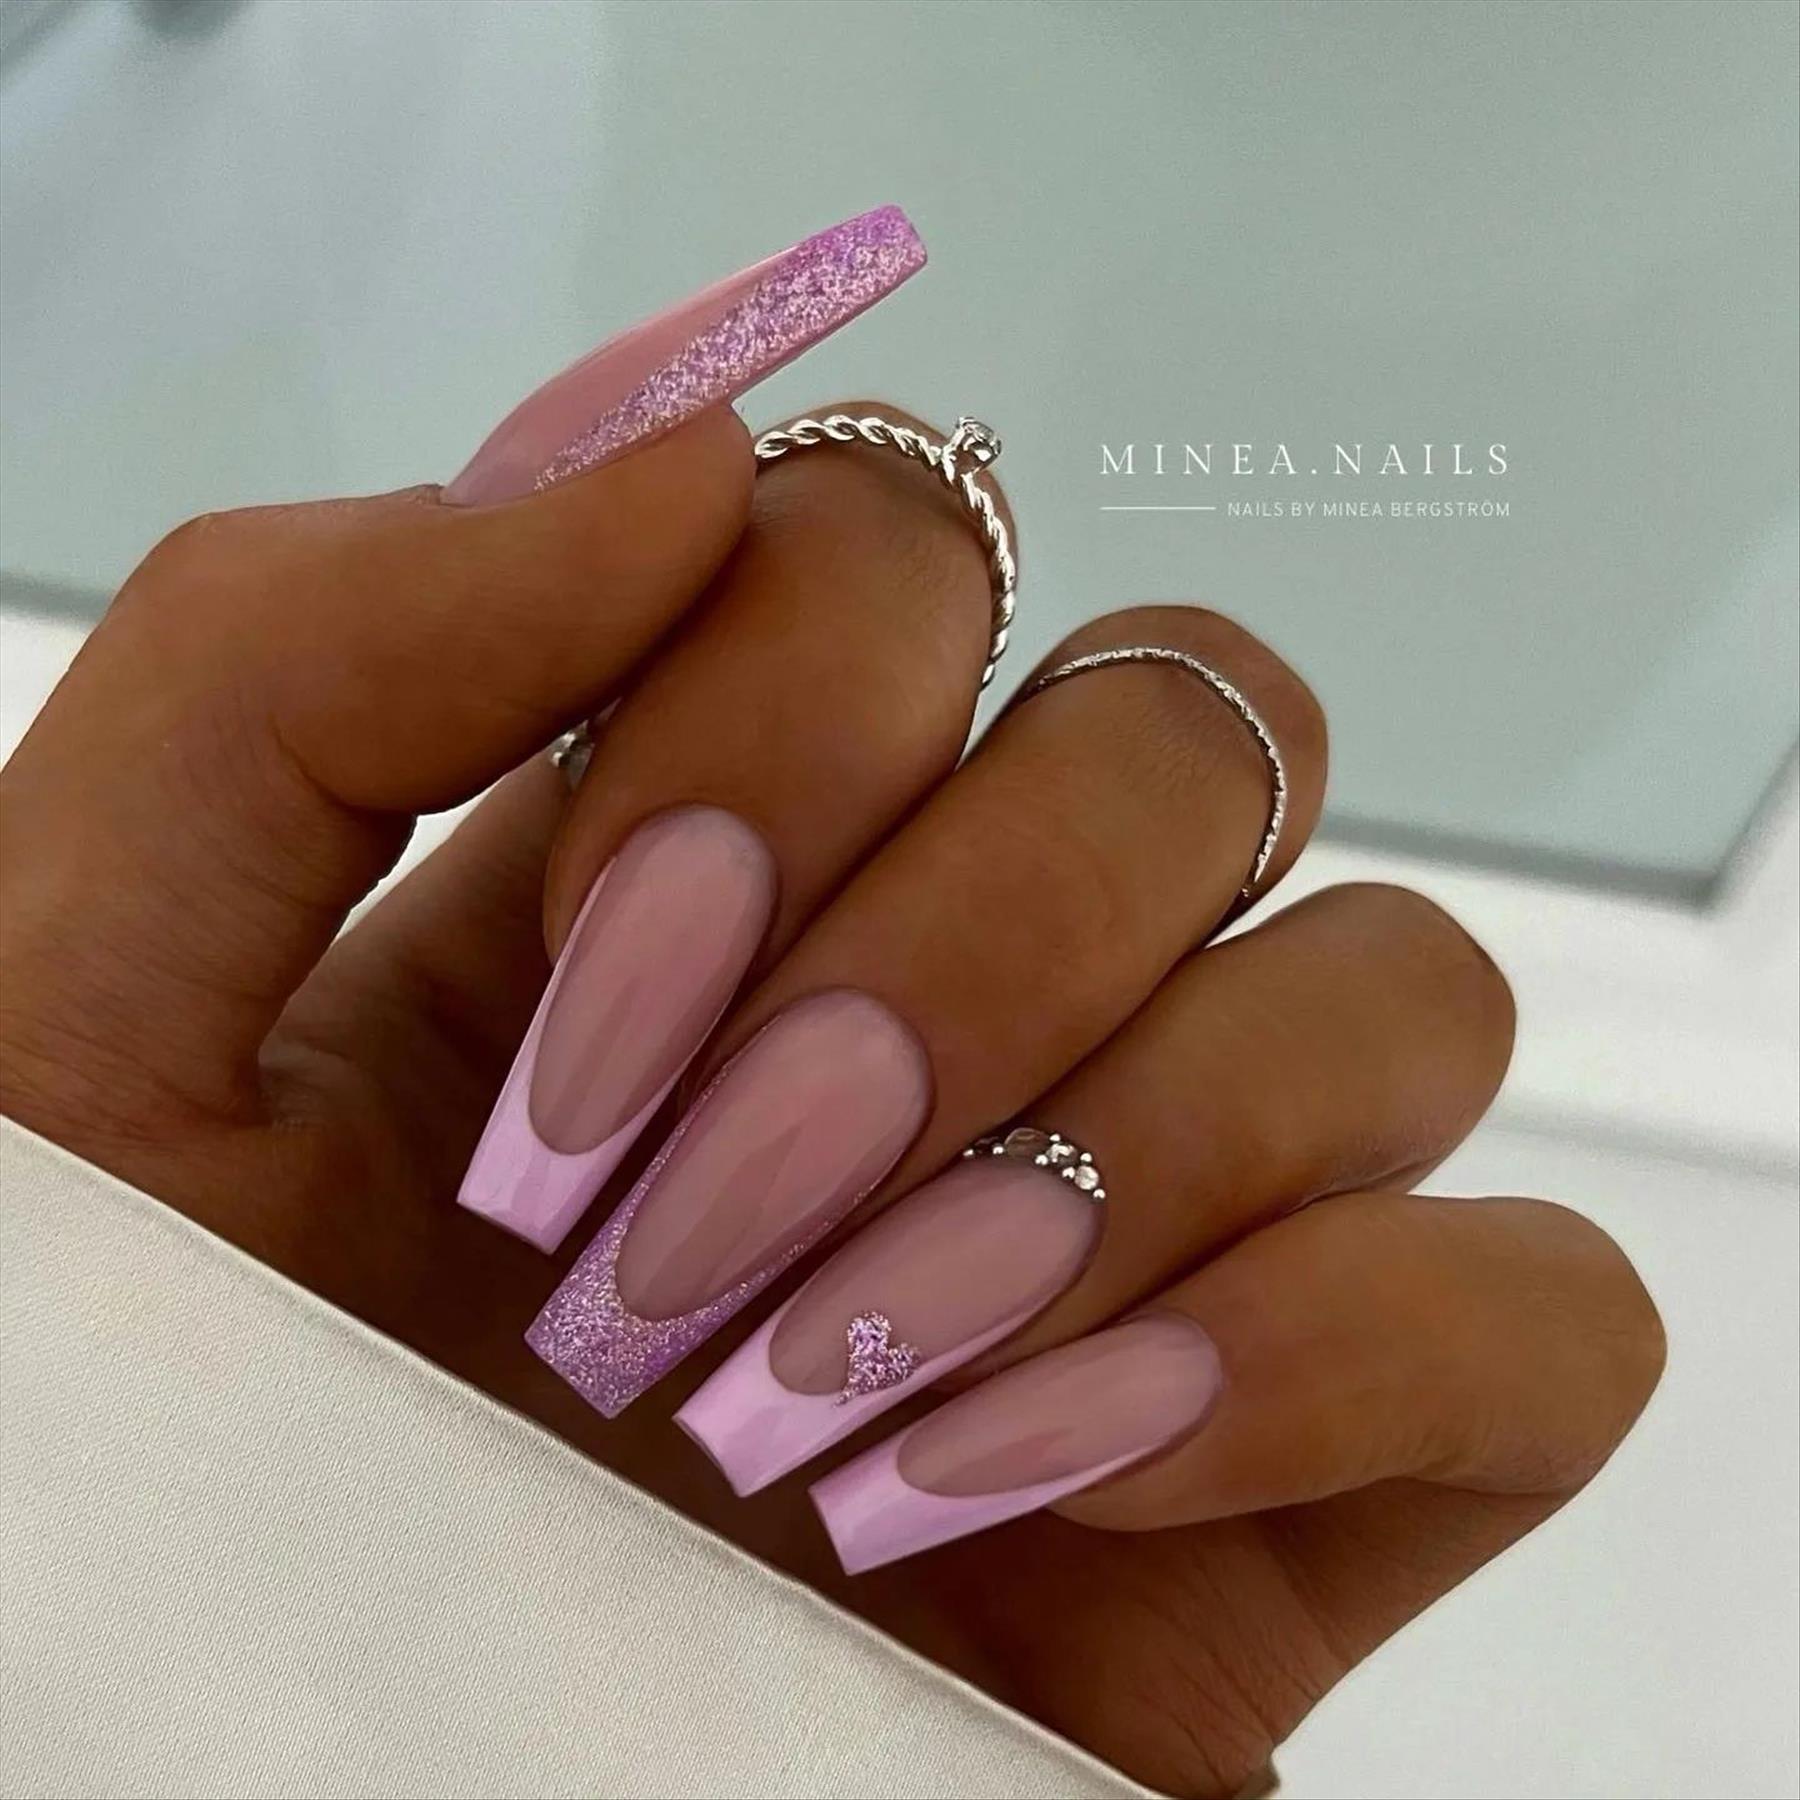 Classic Summer coffin nails acrylic prefect to wear